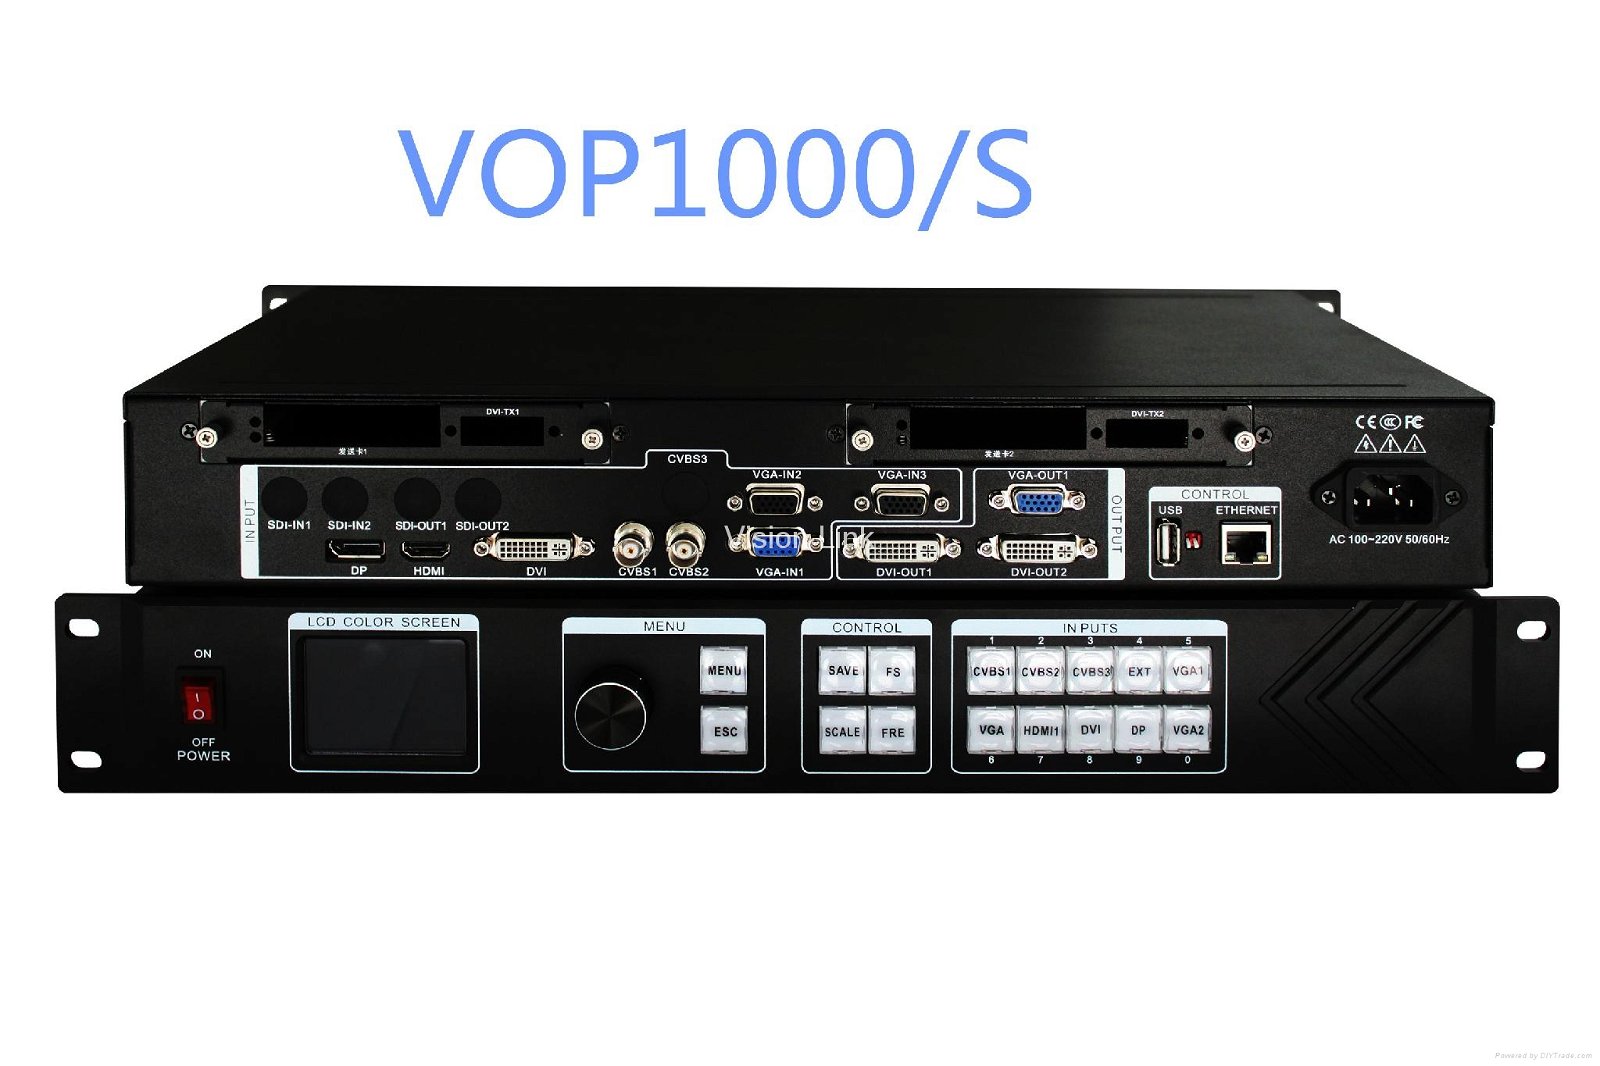 Vop1000/S LED Video Wall Image Scaler